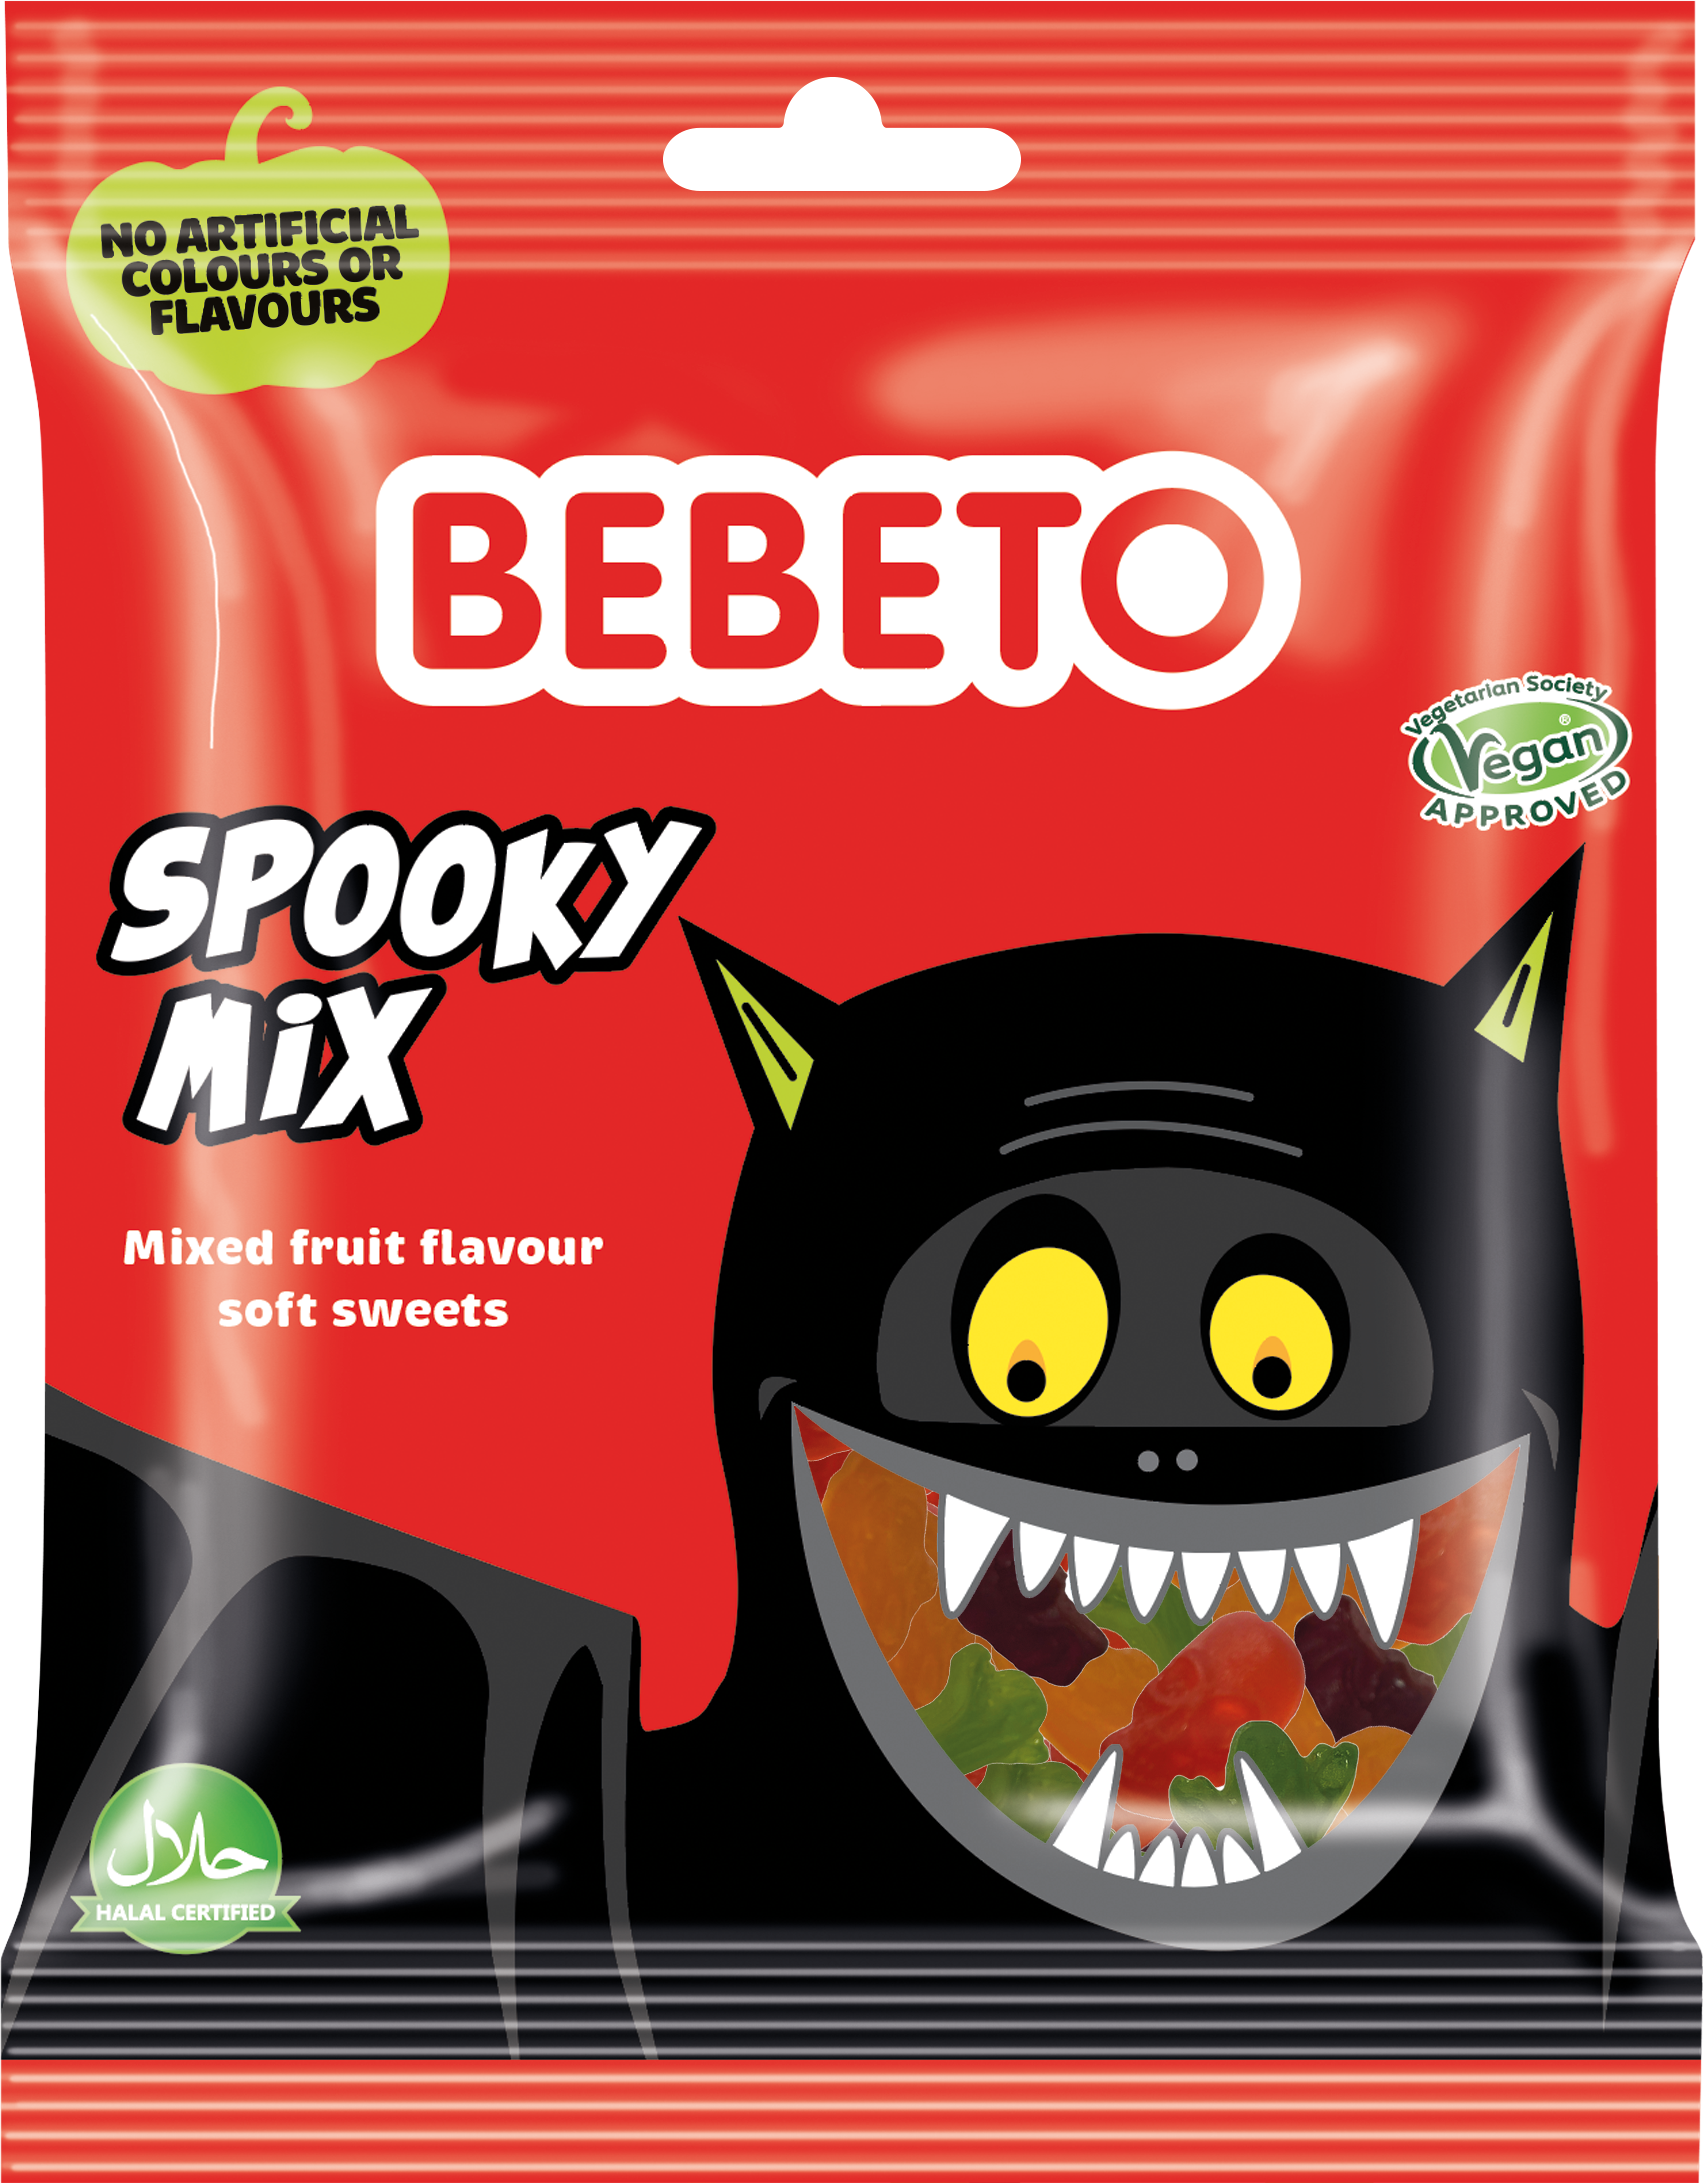 ‘BOO’st confectionery sales this Halloween with new Bebeto Spooky Mix